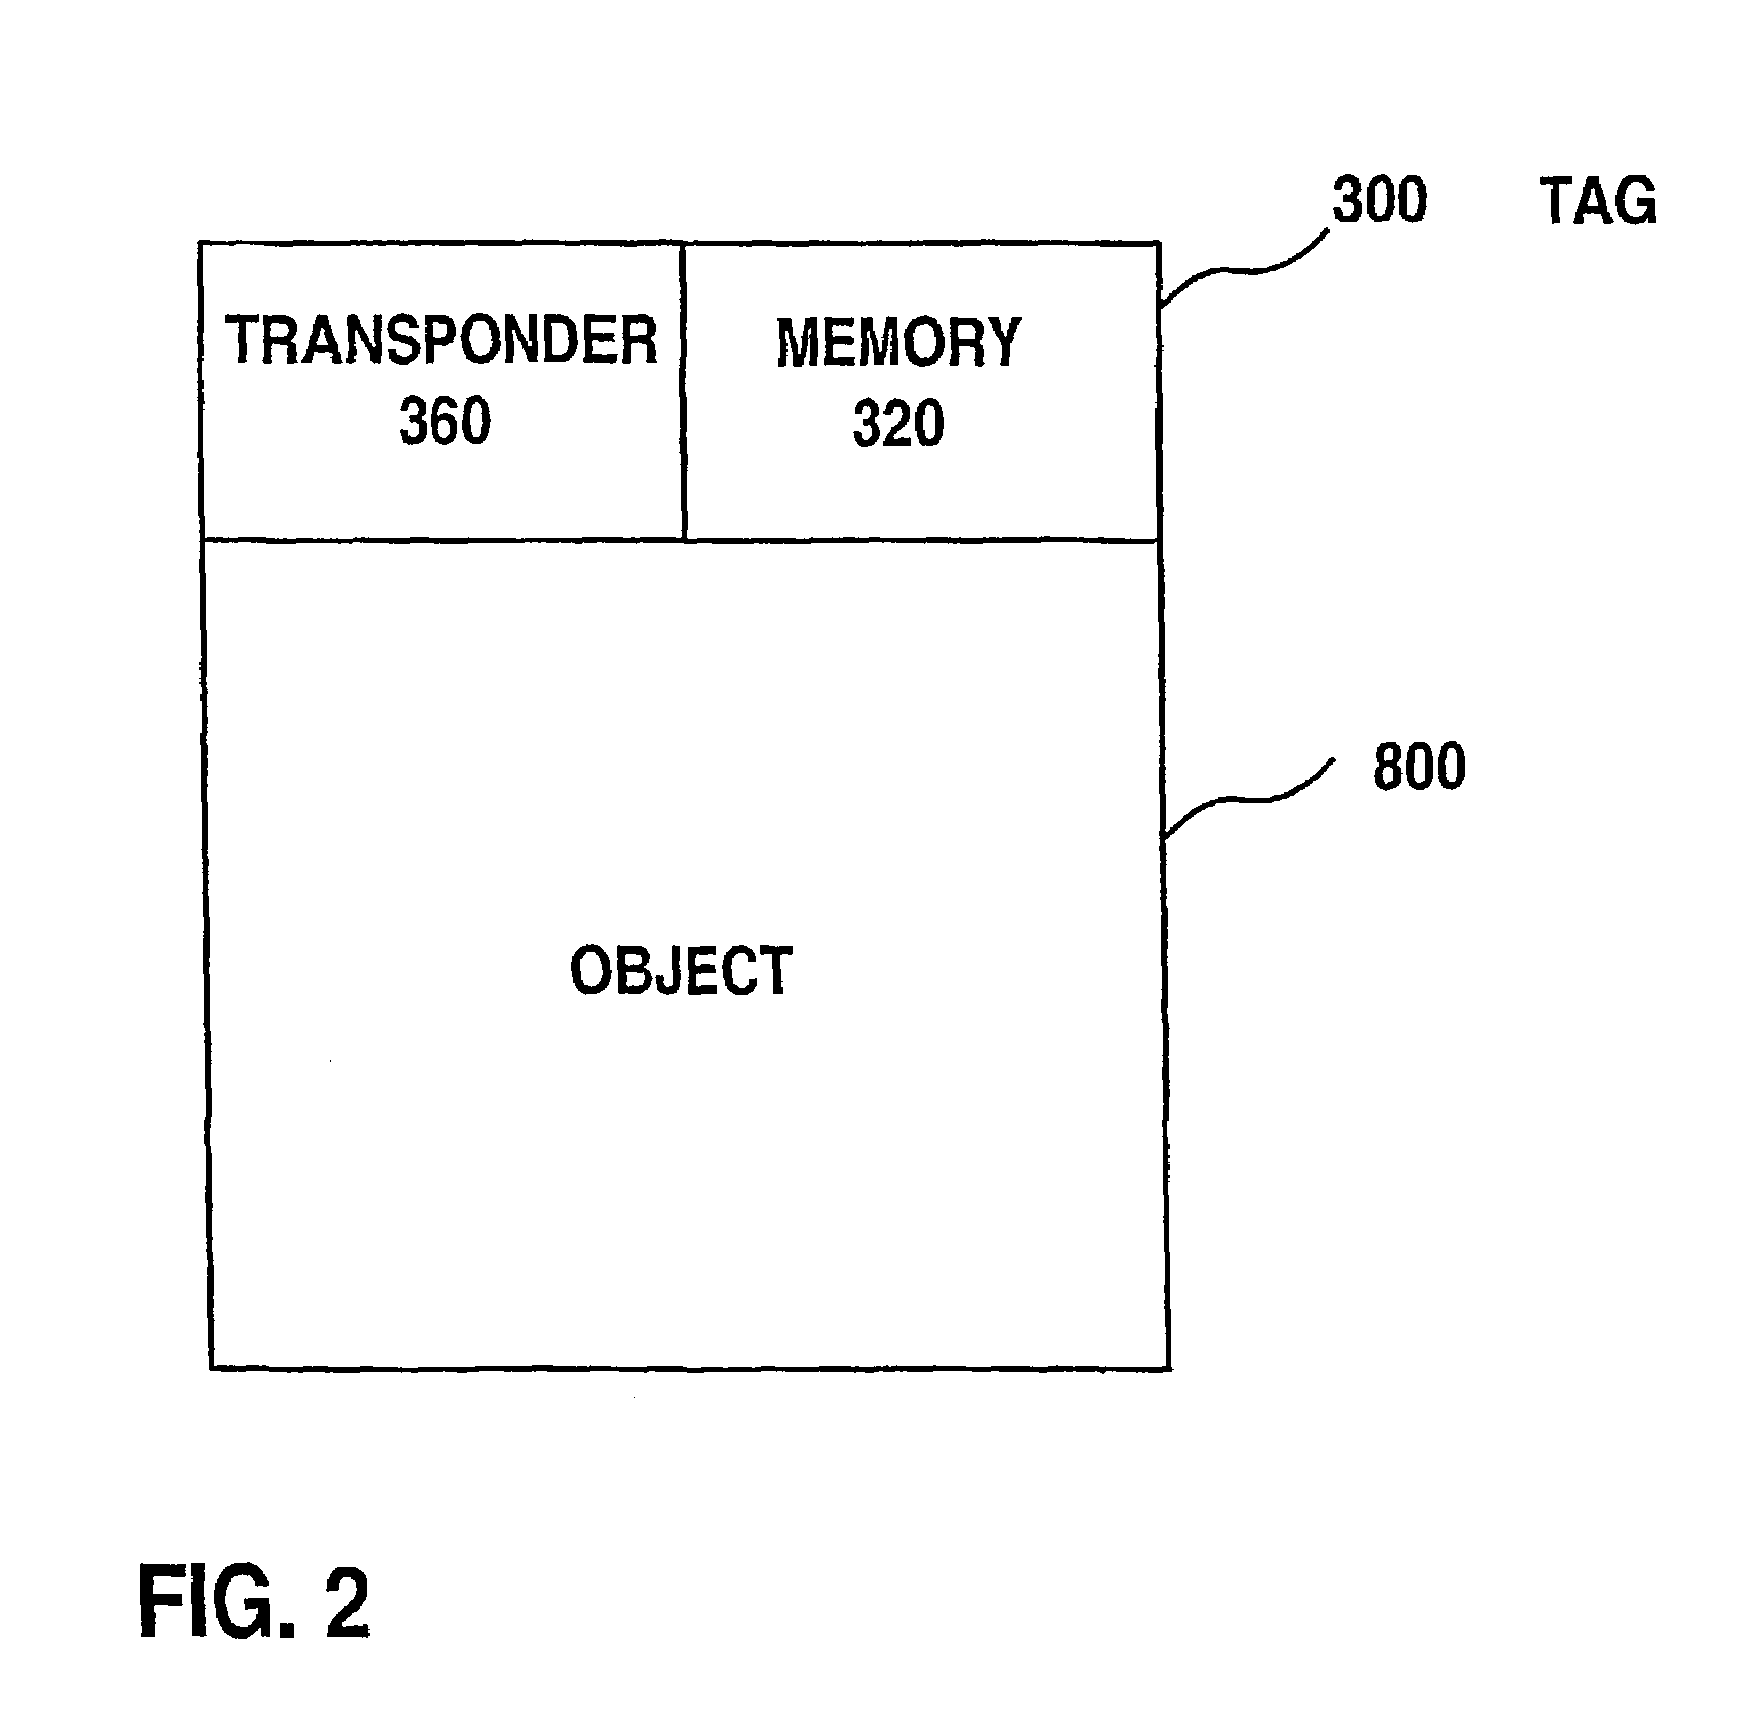 System, method, computer program product for communicating data for objects that are transported from first location to second location